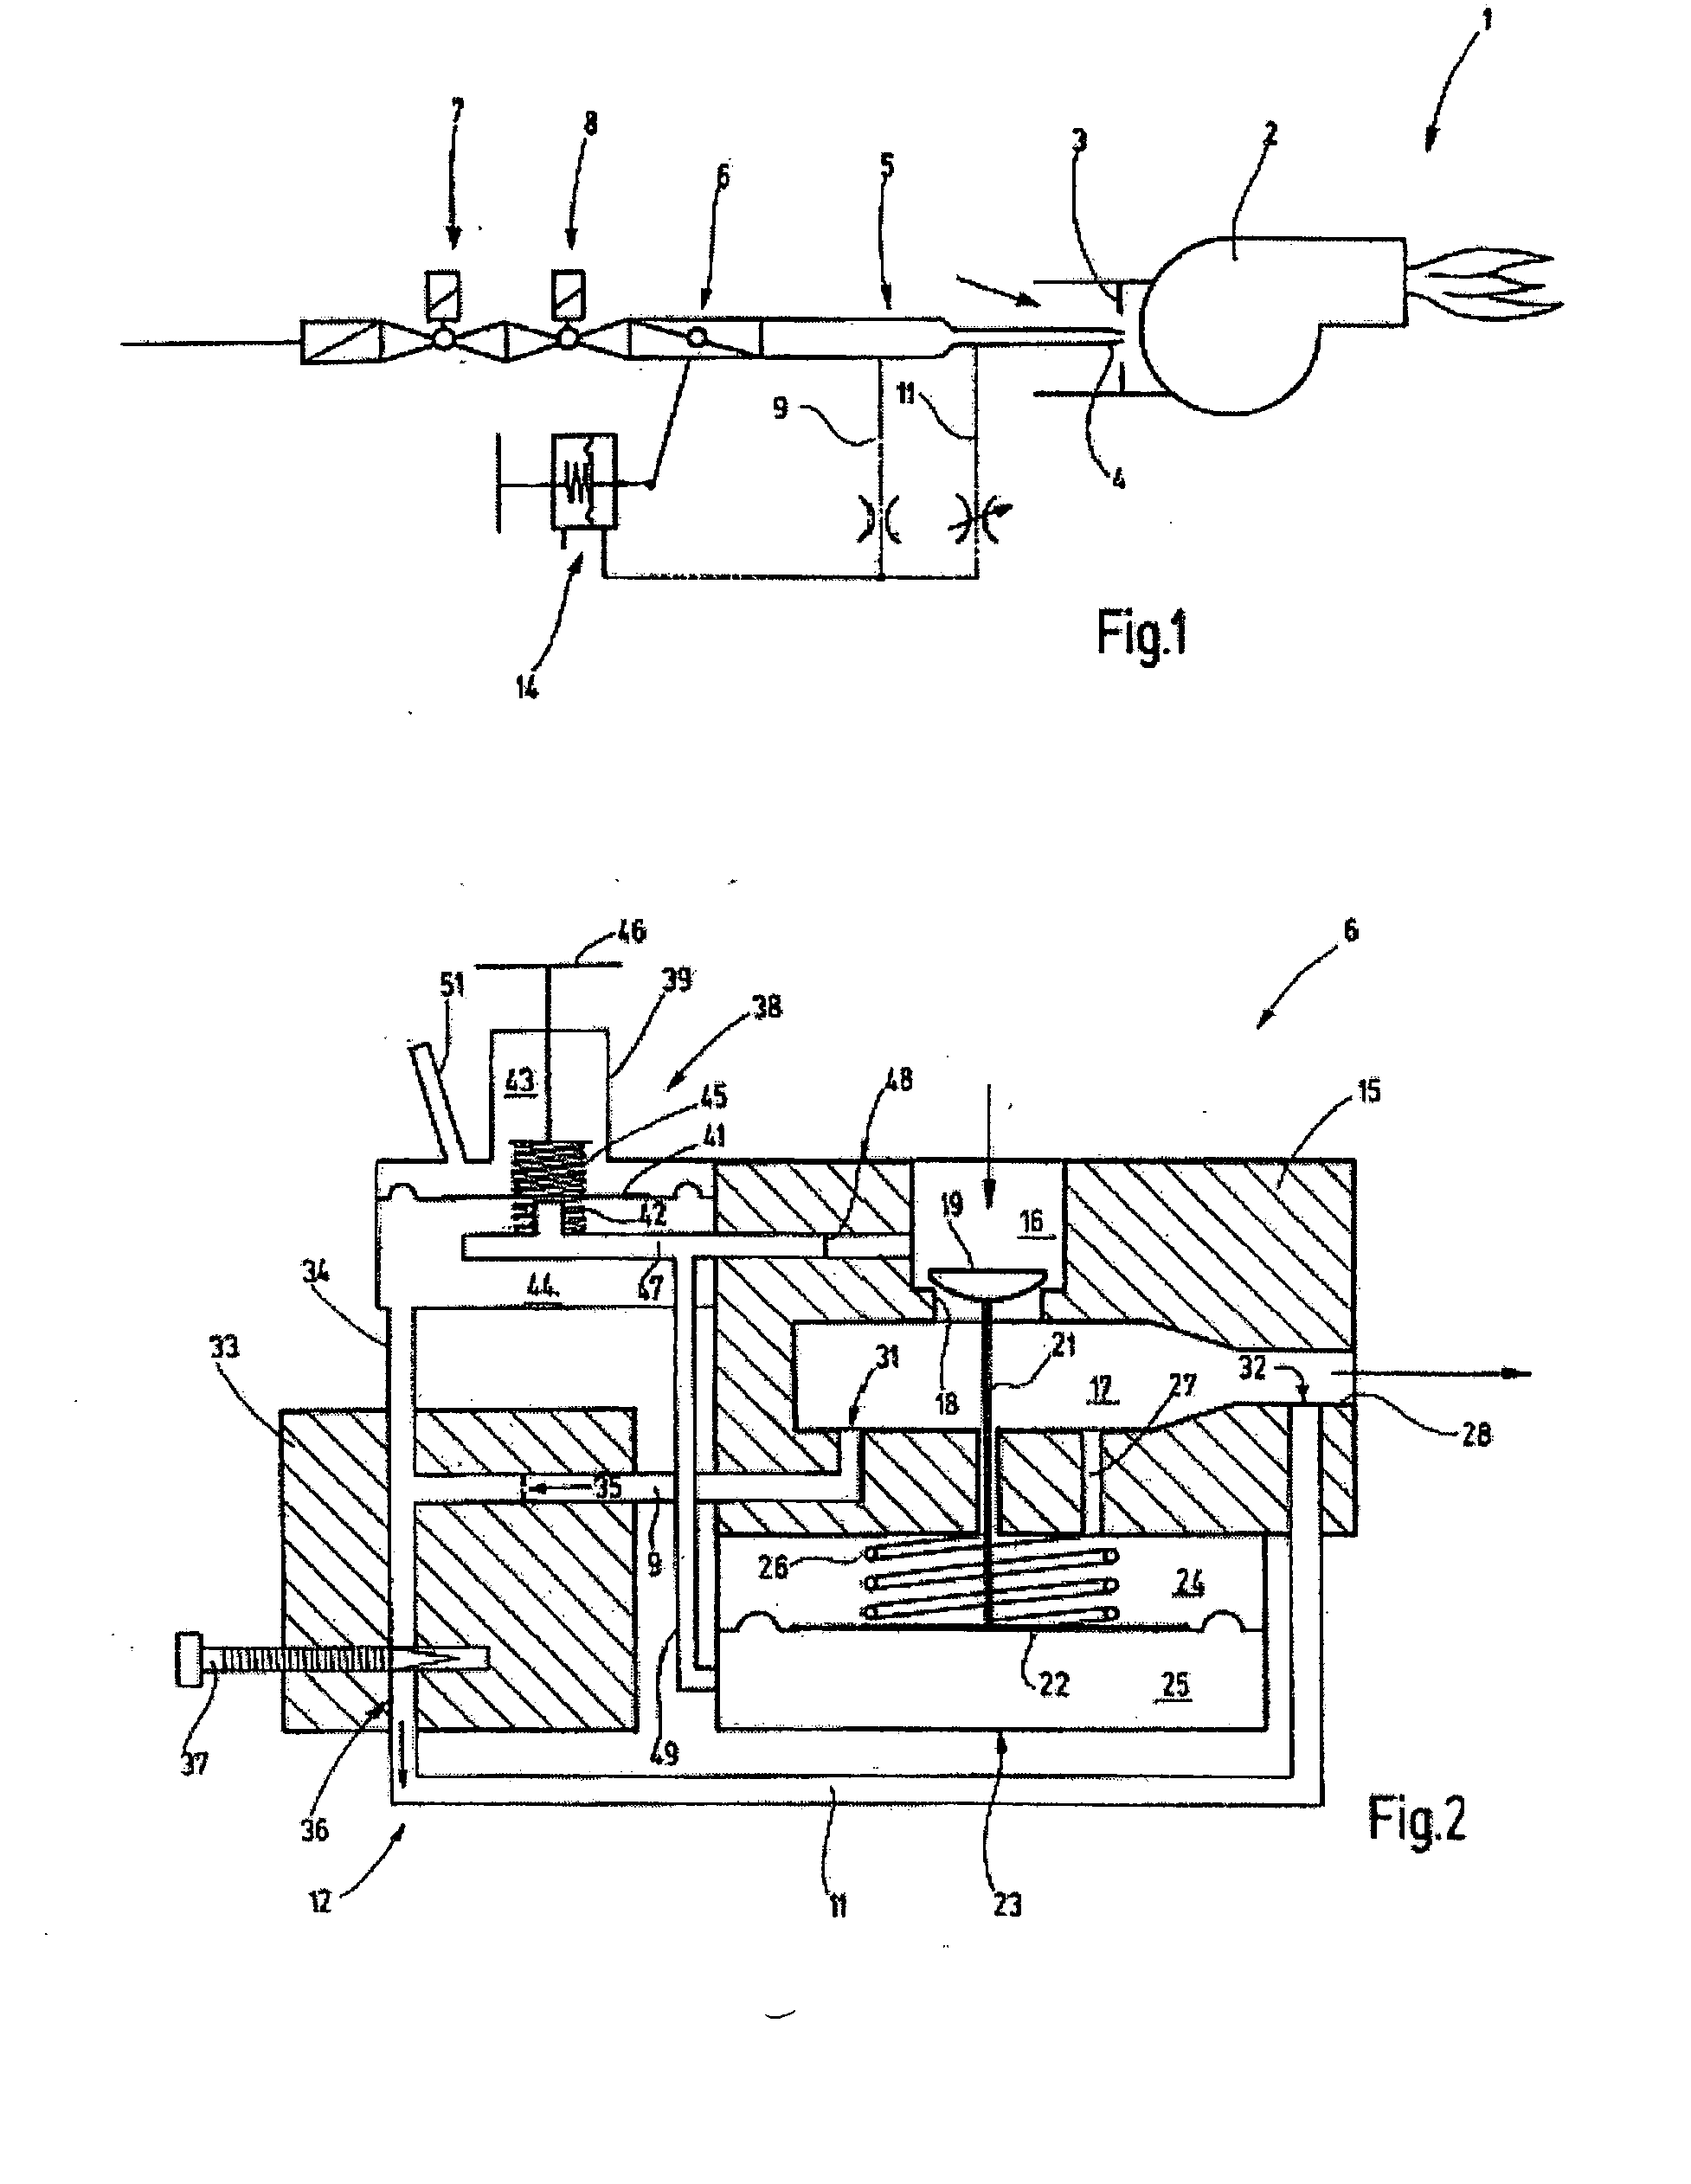 Ratio controller with dynamic ratio formation